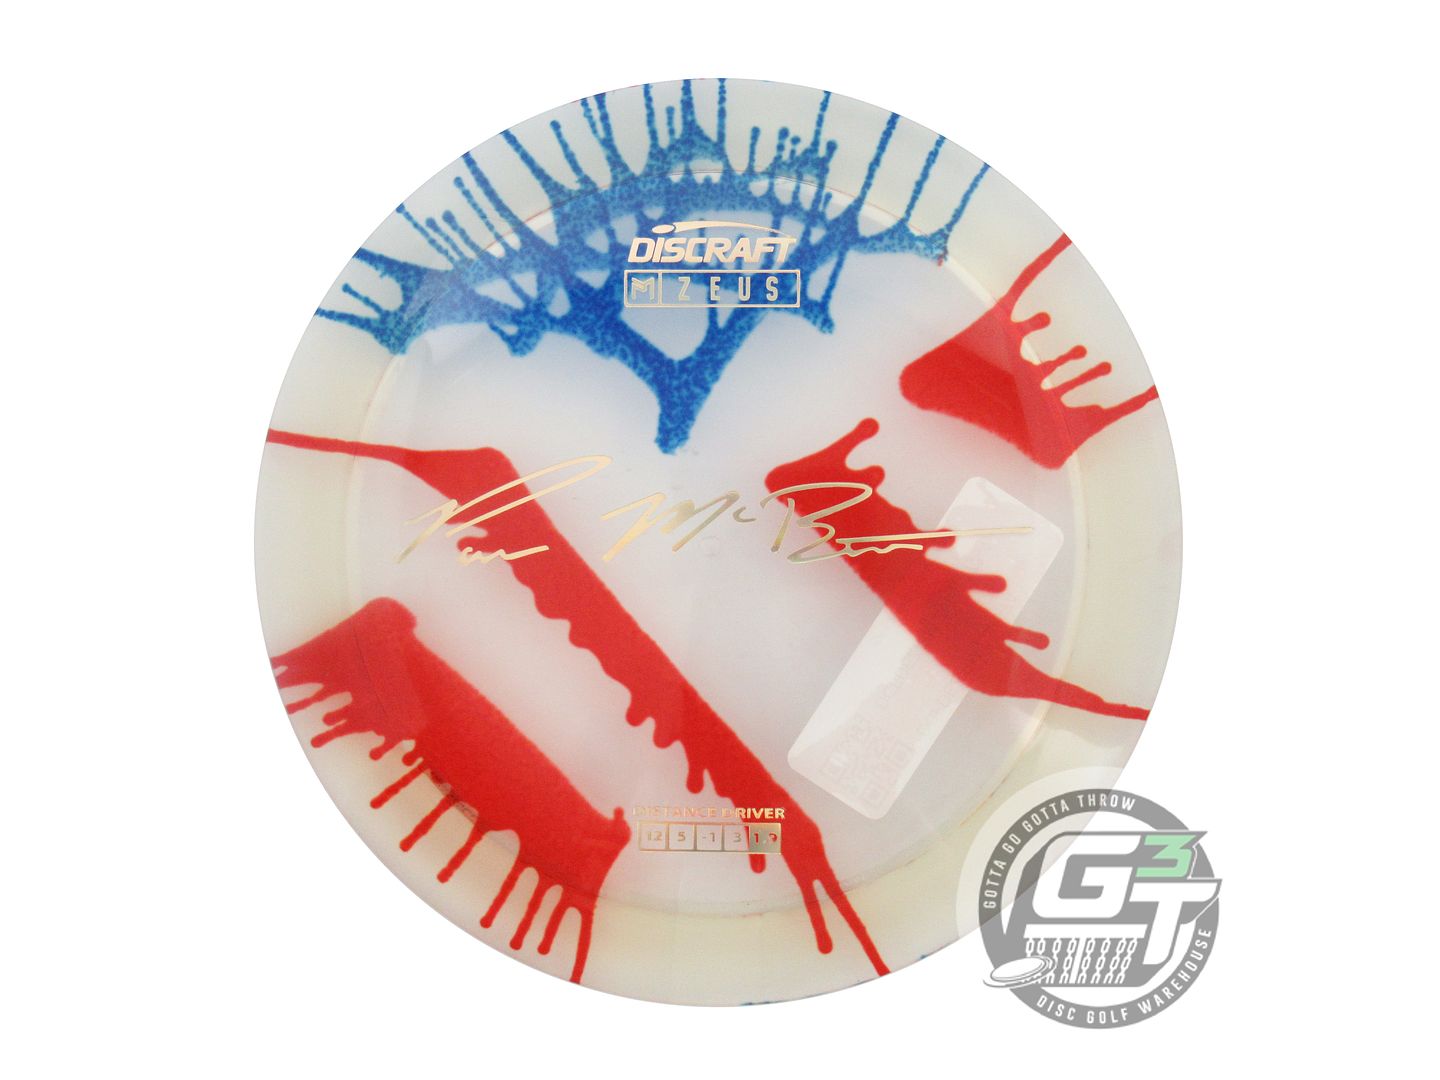 Discraft Paul McBeth Signature Fly Dye Elite Z Zeus Distance Driver Golf Disc (Individually Listed)